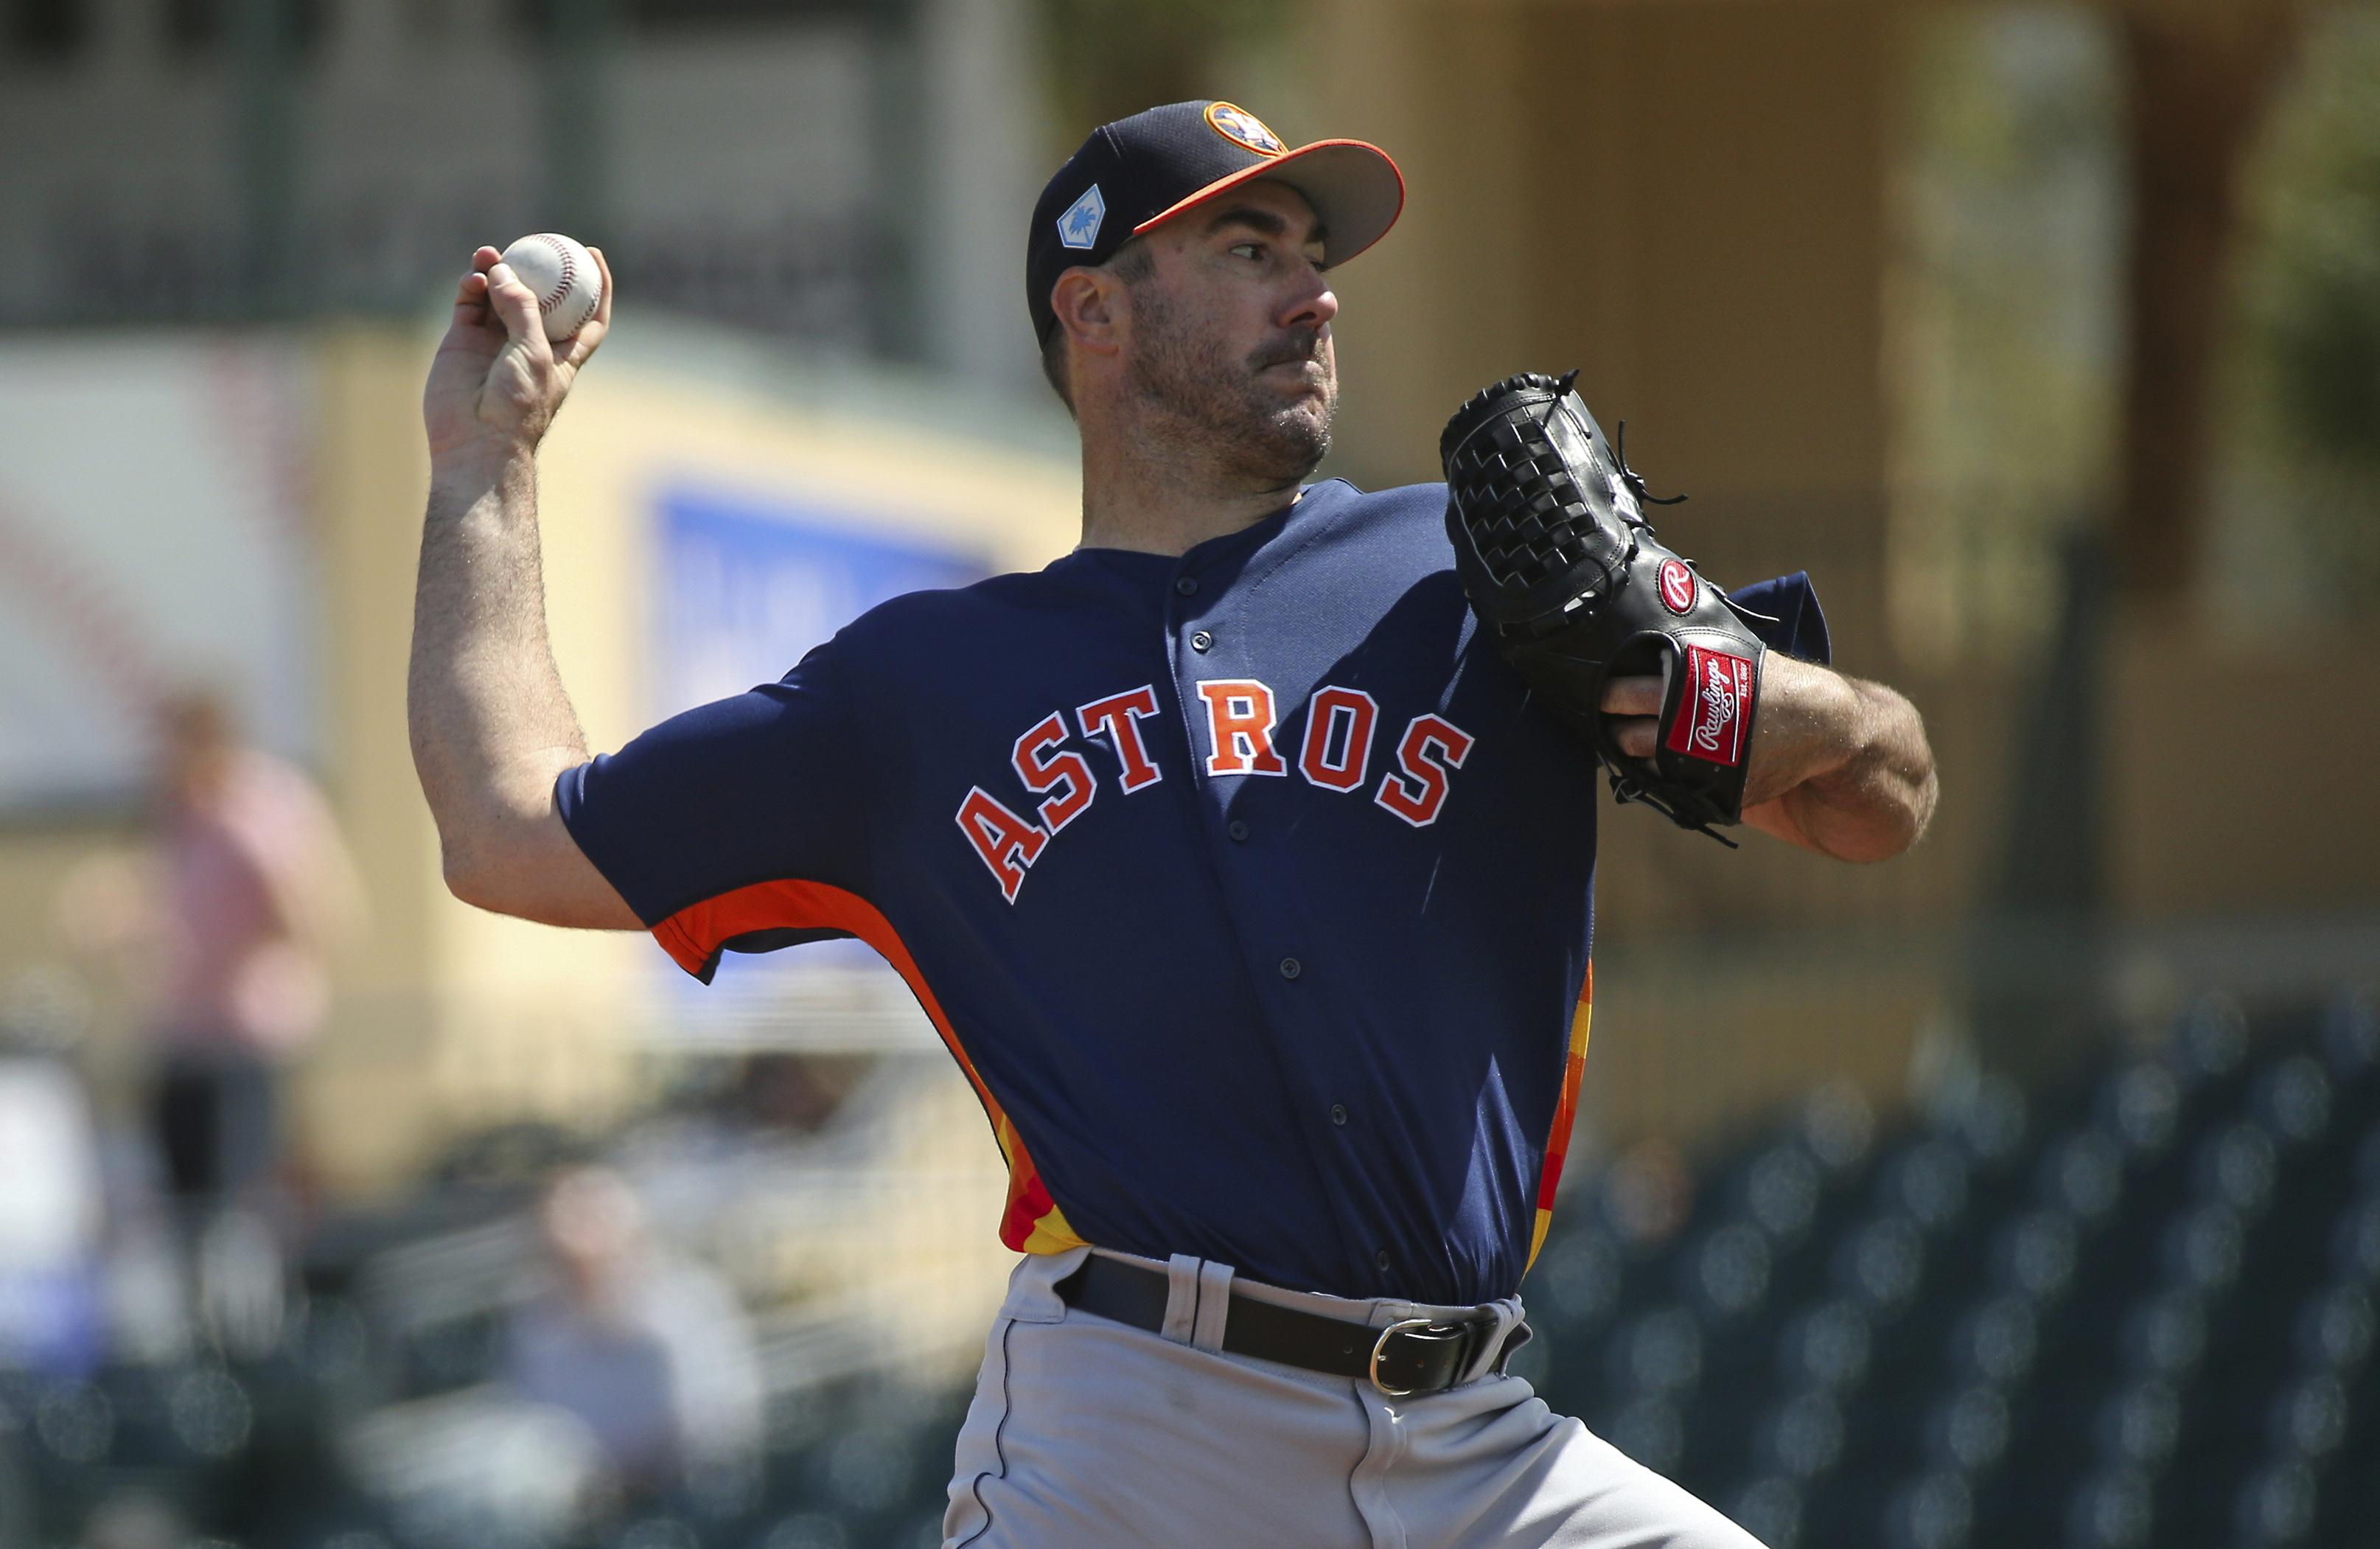 AP source: Astros agree to 2-year extension with Verlander